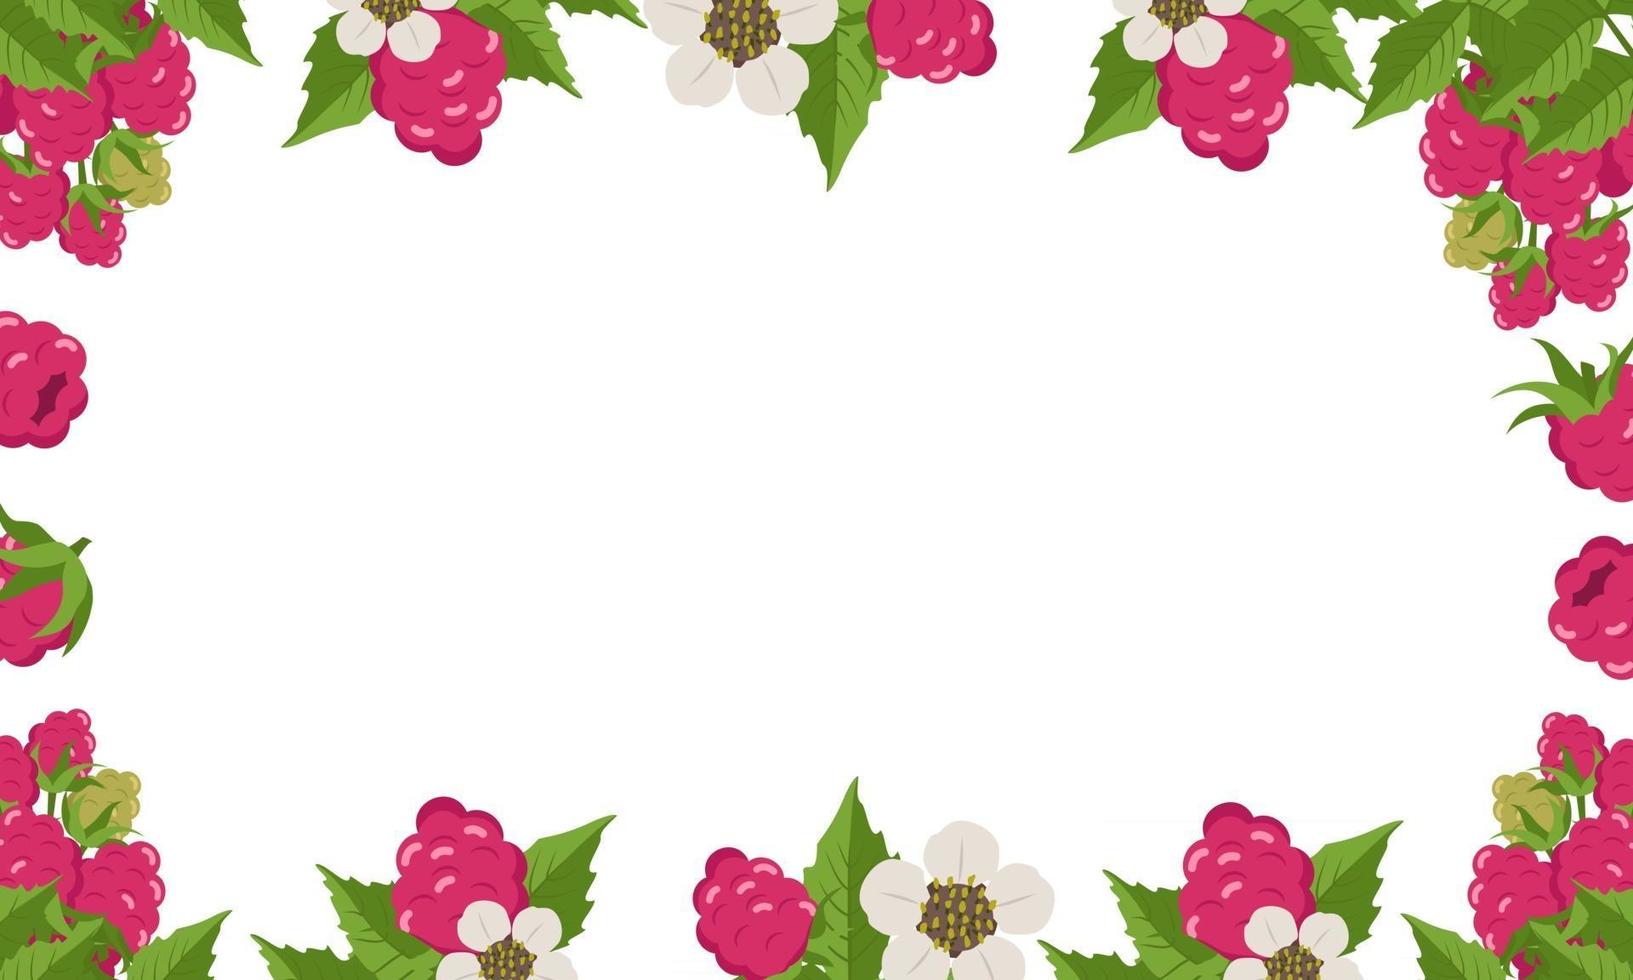 Frame with raspberries, leaves and white flowers on a white background. Bright berry square pattern. Summer food banner vector